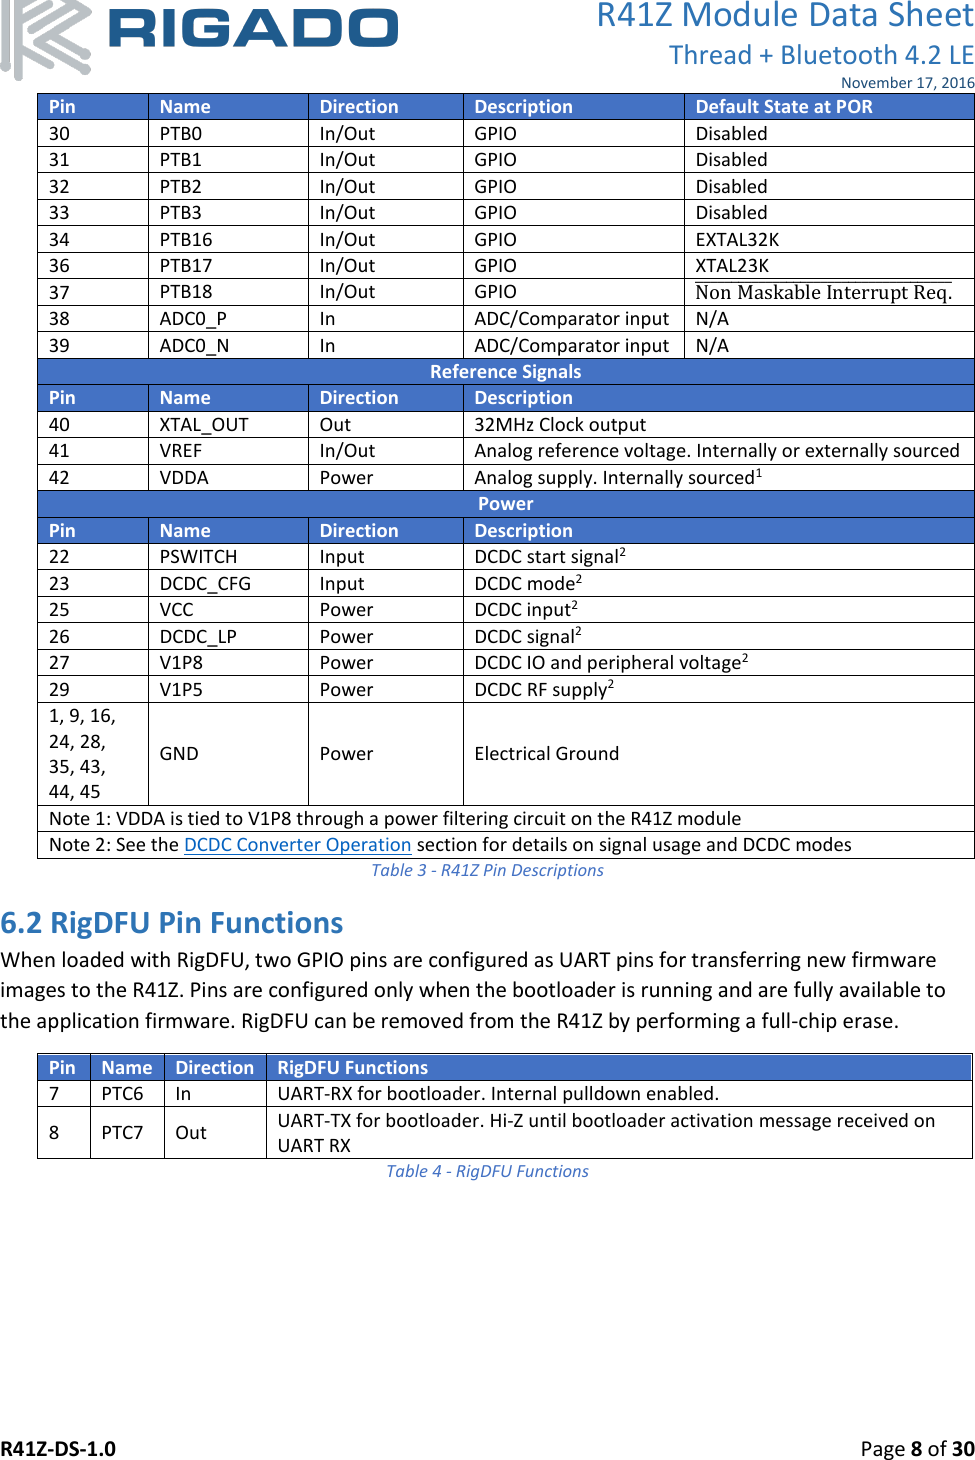 R41Z Module Data Sheet Thread + Bluetooth 4.2 LE November 17, 2016 R41Z-DS-1.0    Page 8 of 30  Pin Name Direction Description Default State at POR 30 PTB0 In/Out GPIO Disabled 31 PTB1 In/Out GPIO Disabled 32 PTB2 In/Out GPIO Disabled 33 PTB3 In/Out GPIO Disabled 34 PTB16 In/Out GPIO EXTAL32K 36 PTB17 In/Out GPIO XTAL23K 37 PTB18 In/Out GPIO Non Maskable Interrupt Req.̅̅̅̅̅̅̅̅̅̅̅̅̅̅̅̅̅̅̅̅̅̅̅̅̅̅̅̅̅̅̅̅̅̅̅̅̅ 38 ADC0_P In ADC/Comparator input N/A 39 ADC0_N In ADC/Comparator input N/A Reference Signals Pin Name Direction Description 40 XTAL_OUT Out 32MHz Clock output 41 VREF In/Out Analog reference voltage. Internally or externally sourced  42 VDDA Power Analog supply. Internally sourced1 Power Pin Name Direction Description 22 PSWITCH Input DCDC start signal2 23 DCDC_CFG Input DCDC mode2 25 VCC Power DCDC input2 26 DCDC_LP Power DCDC signal2 27 V1P8 Power DCDC IO and peripheral voltage2 29 V1P5 Power DCDC RF supply2 1, 9, 16, 24, 28, 35, 43, 44, 45 GND Power Electrical Ground Note 1: VDDA is tied to V1P8 through a power filtering circuit on the R41Z module Note 2: See the DCDC Converter Operation section for details on signal usage and DCDC modes Table 3 - R41Z Pin Descriptions 6.2 RigDFU Pin Functions When loaded with RigDFU, two GPIO pins are configured as UART pins for transferring new firmware images to the R41Z. Pins are configured only when the bootloader is running and are fully available to the application firmware. RigDFU can be removed from the R41Z by performing a full-chip erase. Pin Name Direction RigDFU Functions 7 PTC6 In UART-RX for bootloader. Internal pulldown enabled. 8 PTC7 Out UART-TX for bootloader. Hi-Z until bootloader activation message received on UART RX Table 4 - RigDFU Functions    